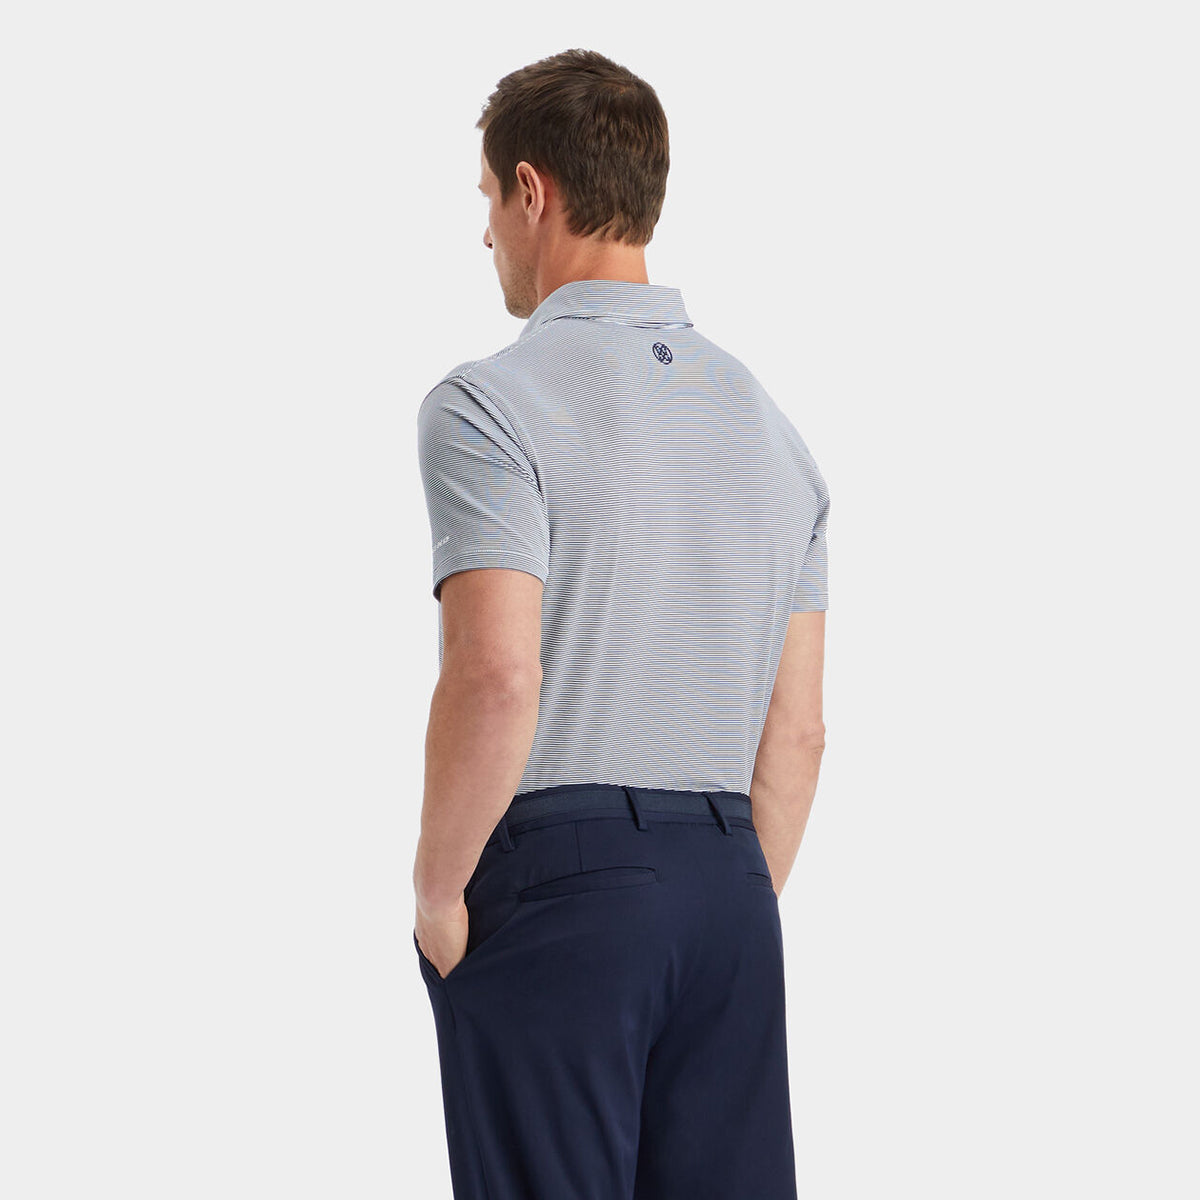 Back side of the product image of the shirt featured on a male model.  Shirt is tucked in navy chino pantsture